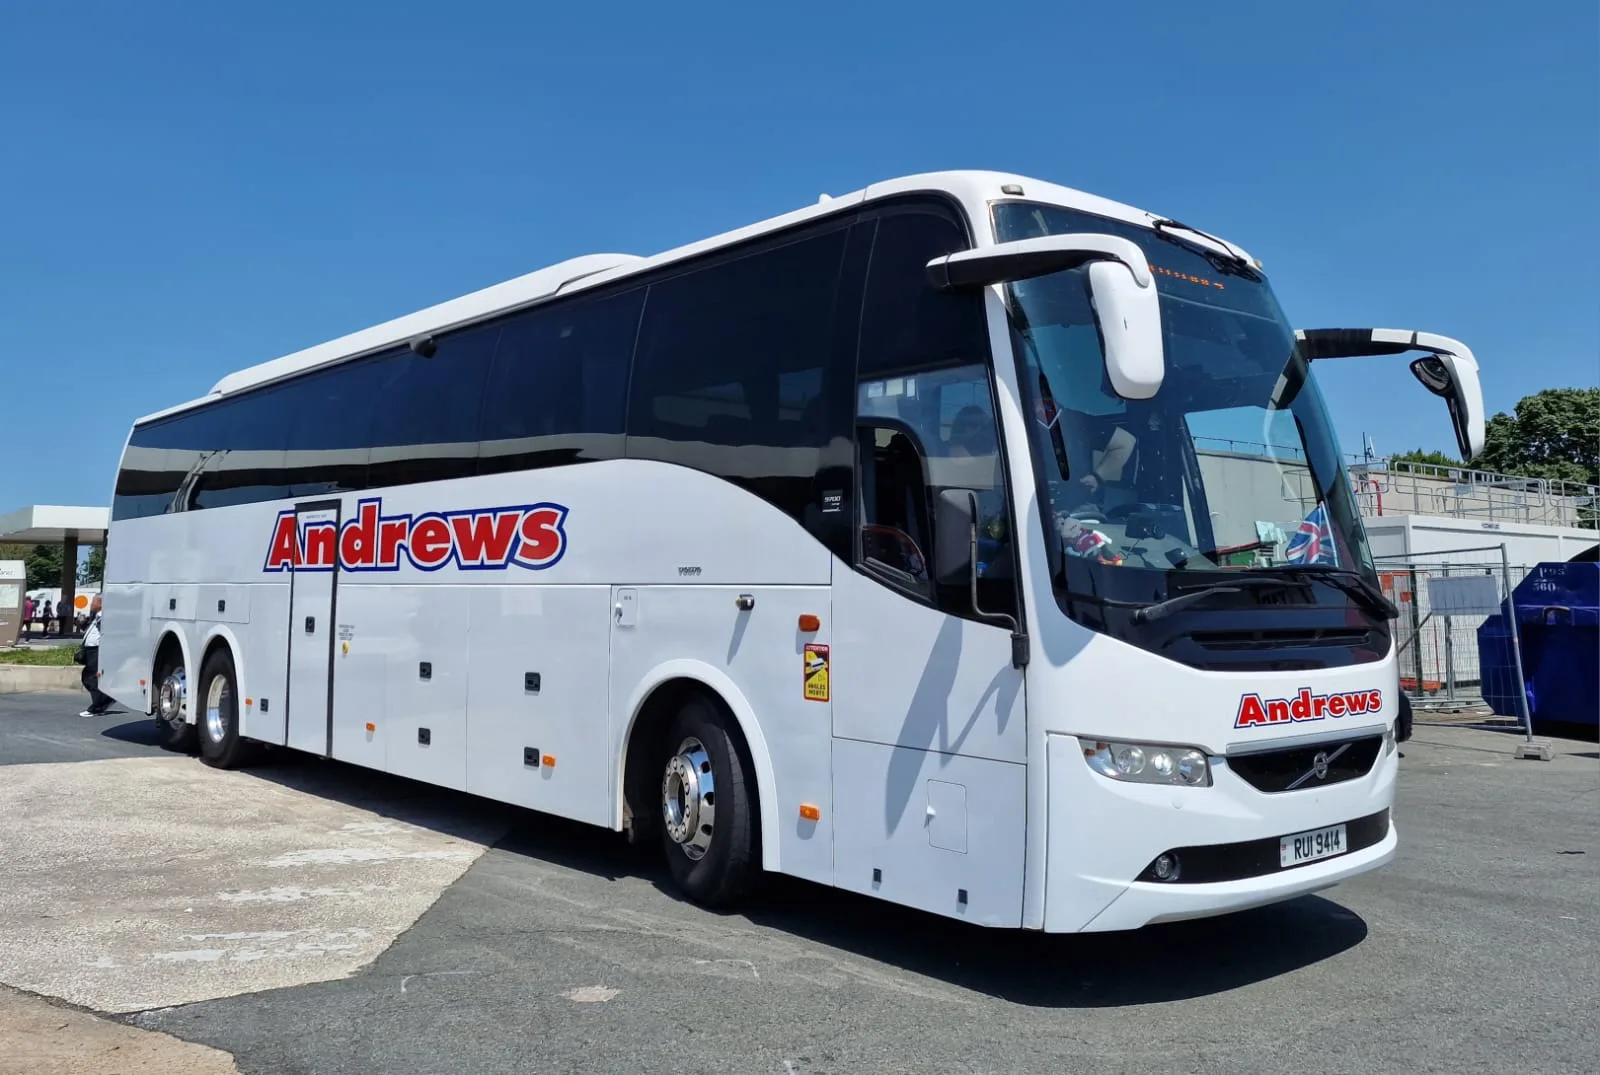 Enforcement action against Andrews Coaches of Foxton -begun by South Cambridgeshire District Council - has been quashed on appeal